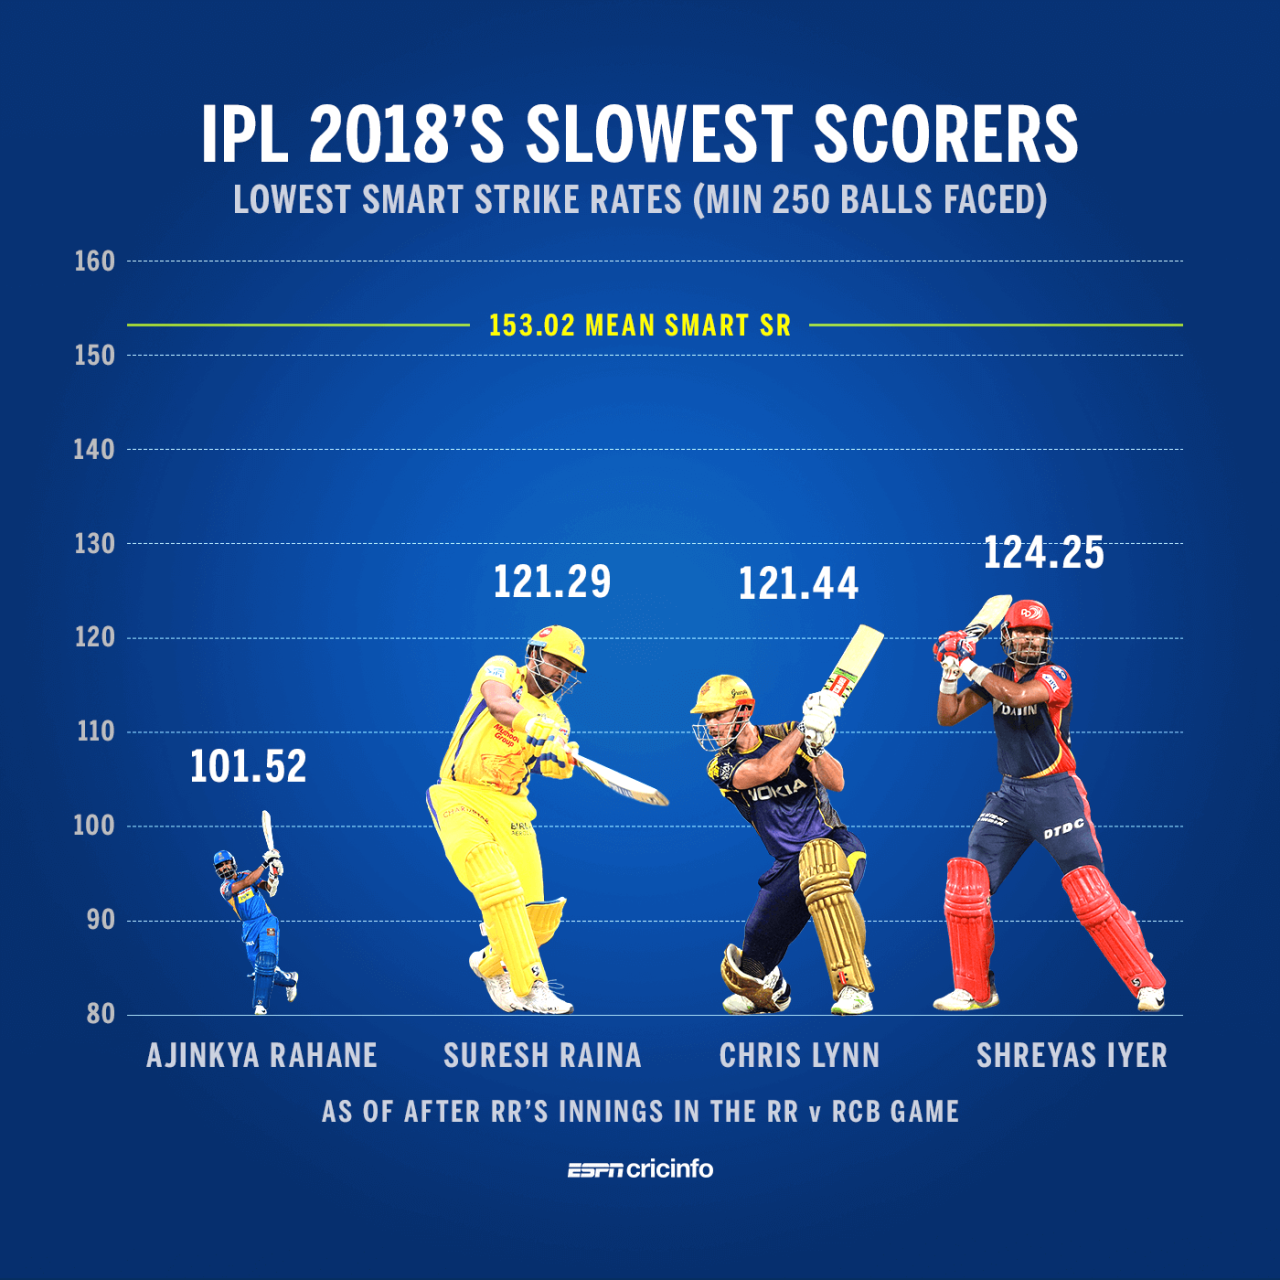 Ajinkya Rahane has been by far the slowest scorer this IPL among all batsmen who have faced 250+ balls, May 19, 2018